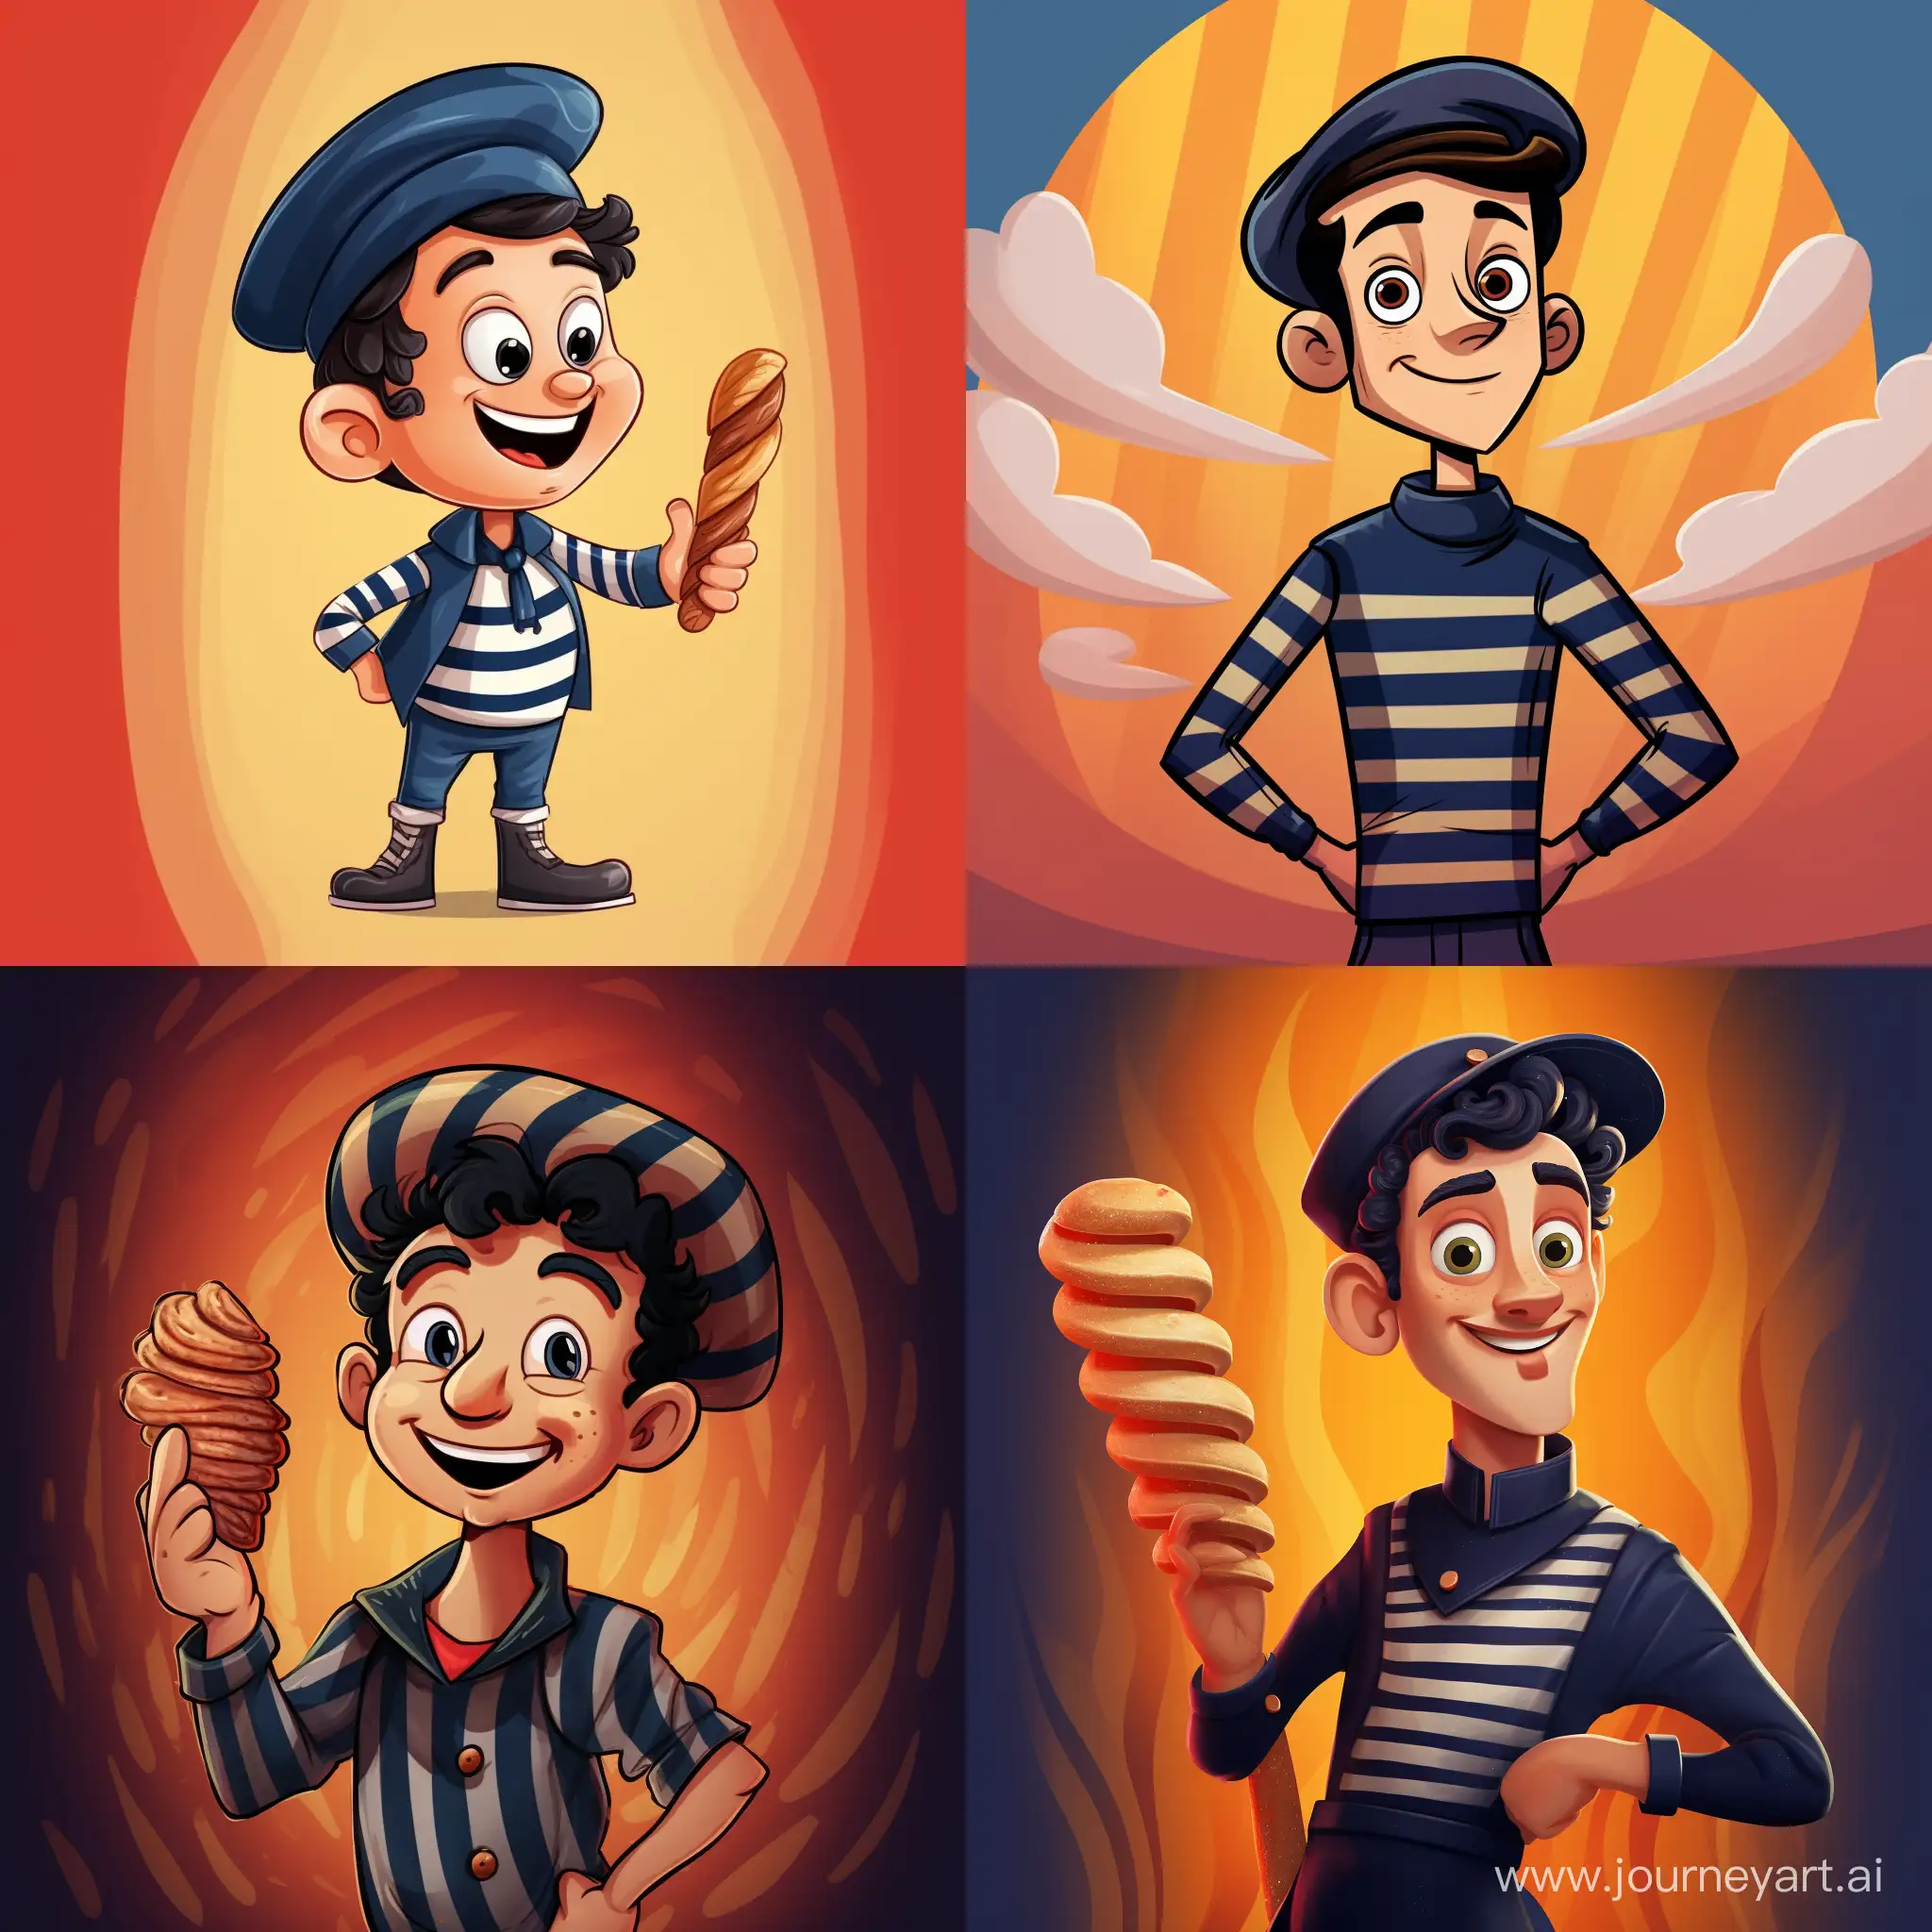 Cheerful-French-Cartoon-Character-with-Baguette-and-Beret